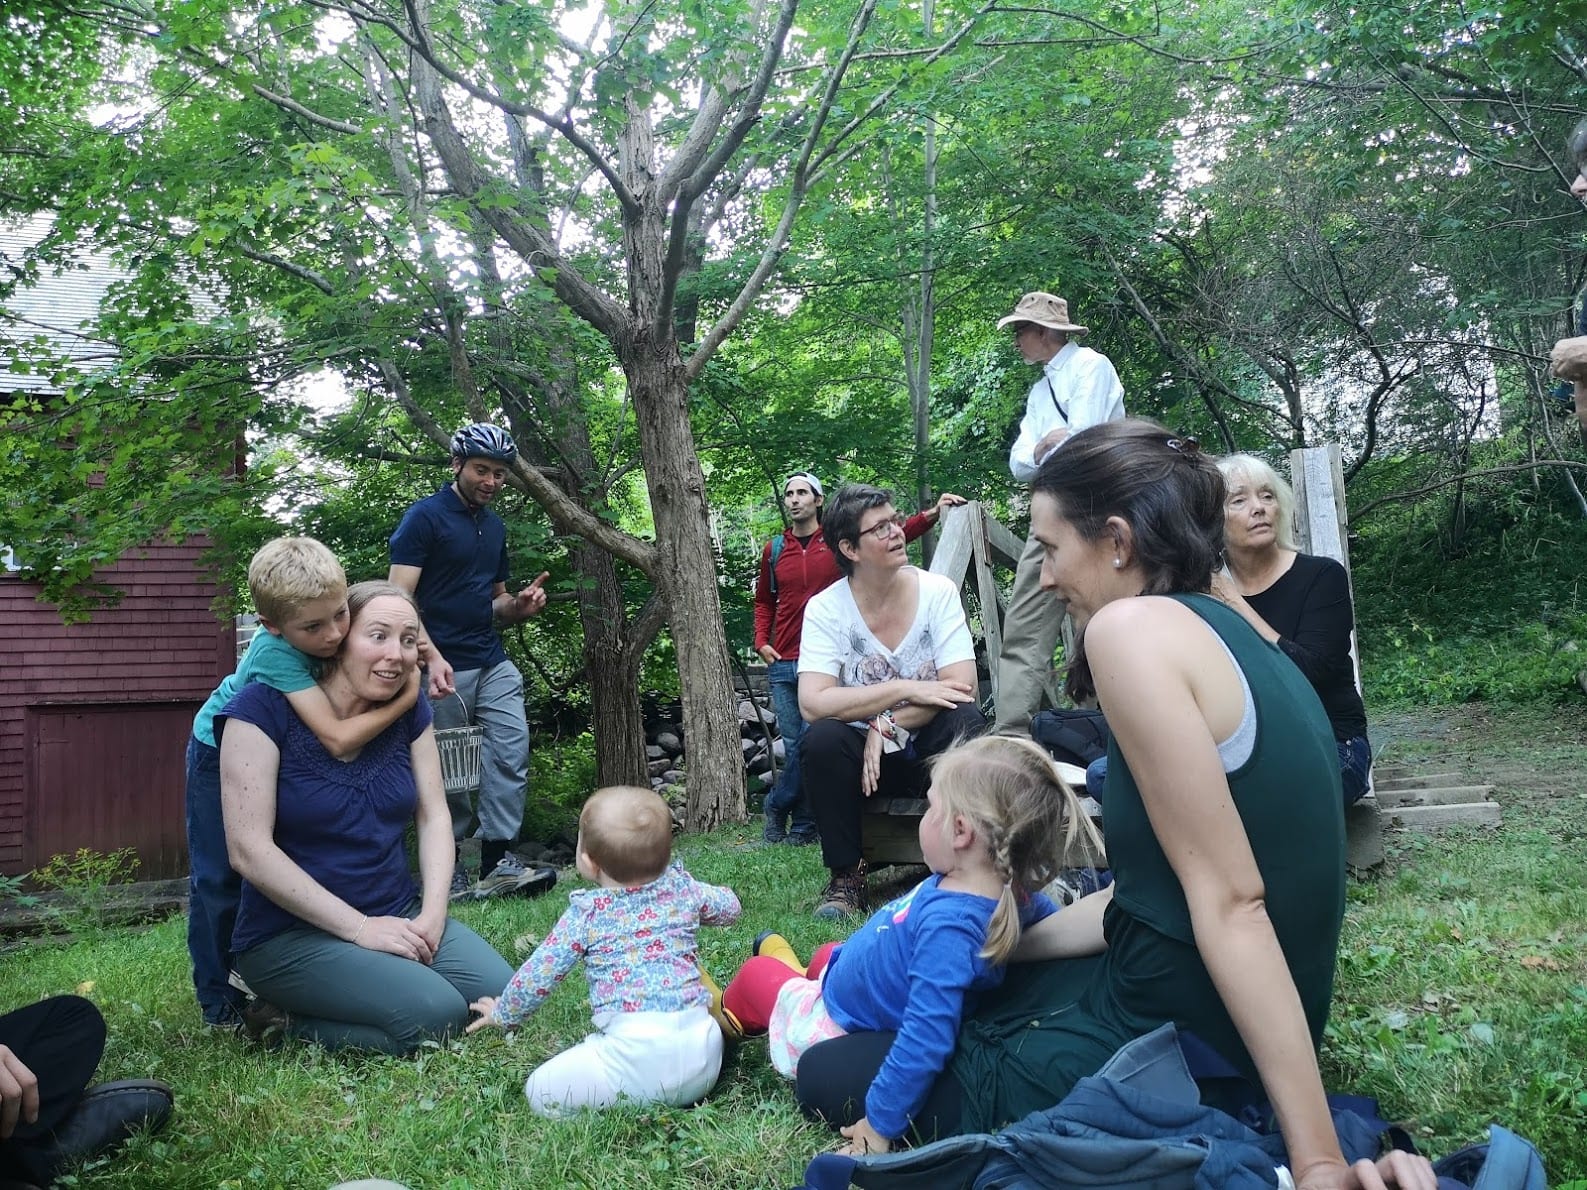 Cohousing: A safe place for children to play and build friendships